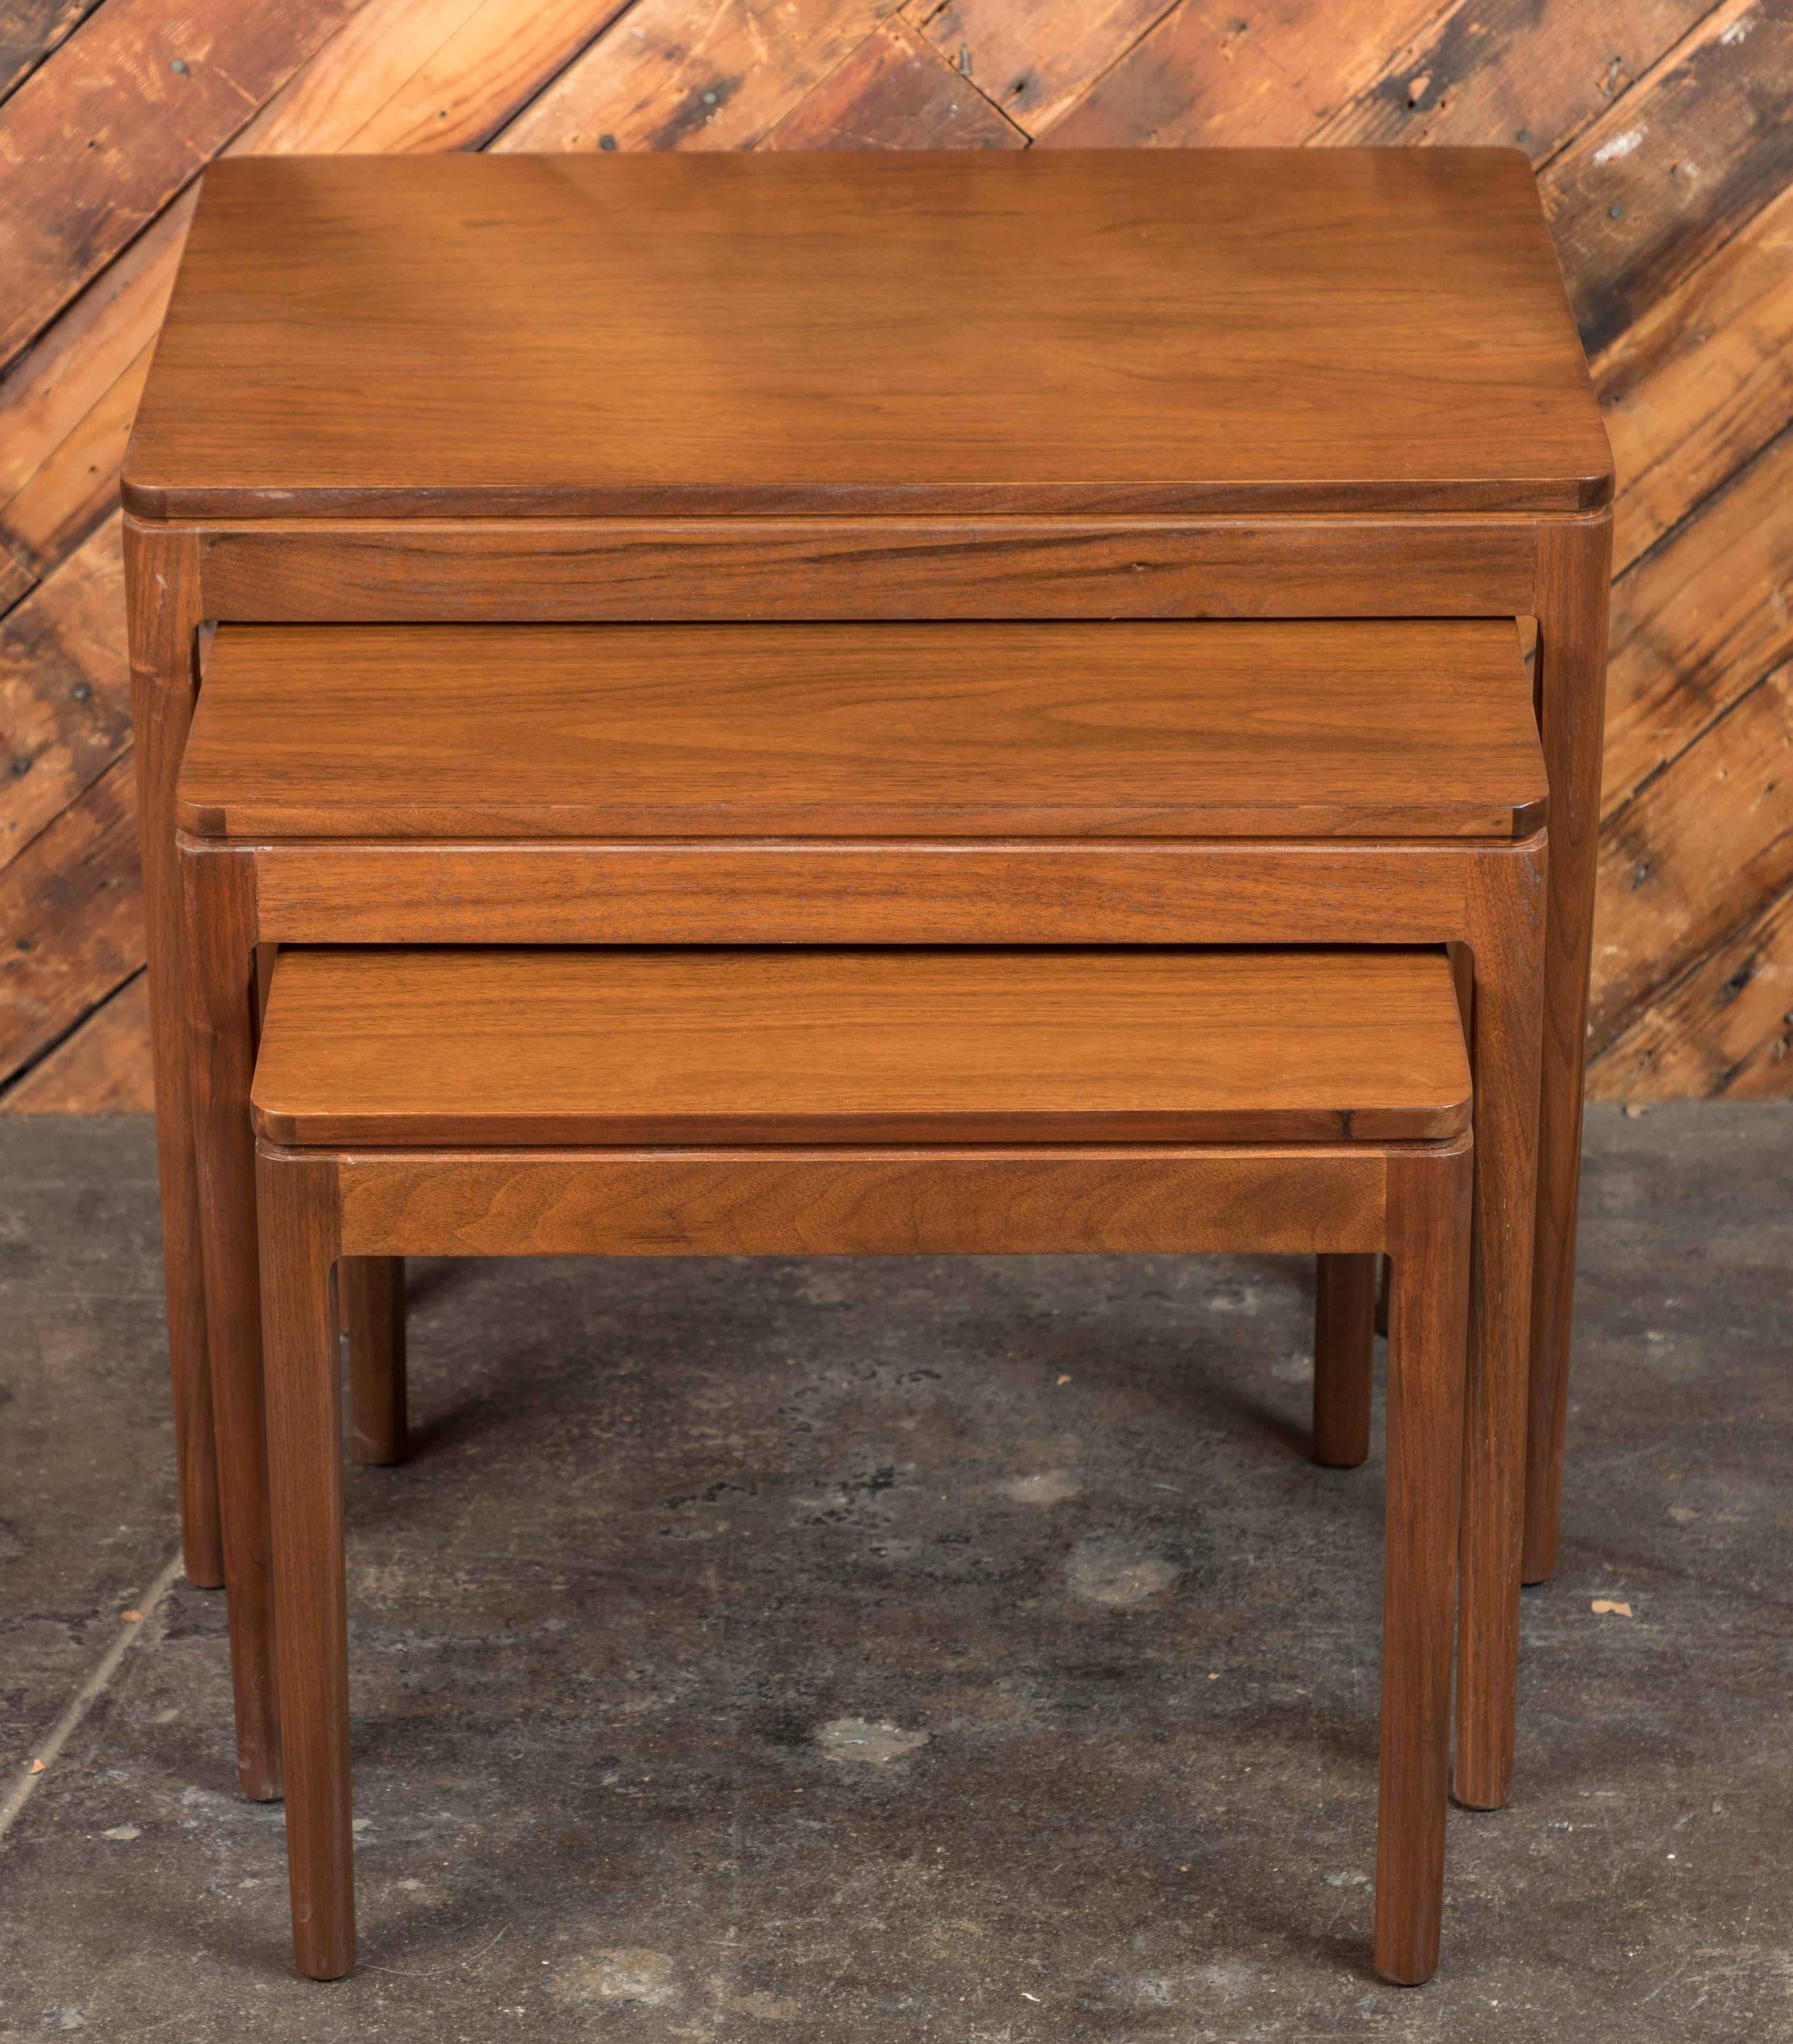 Drexel declaration
Stamped and dated 1962
Elegant set of three nesting tables by Kipp Stewart for Drexel
Refinished walnut
Beautiful grain.